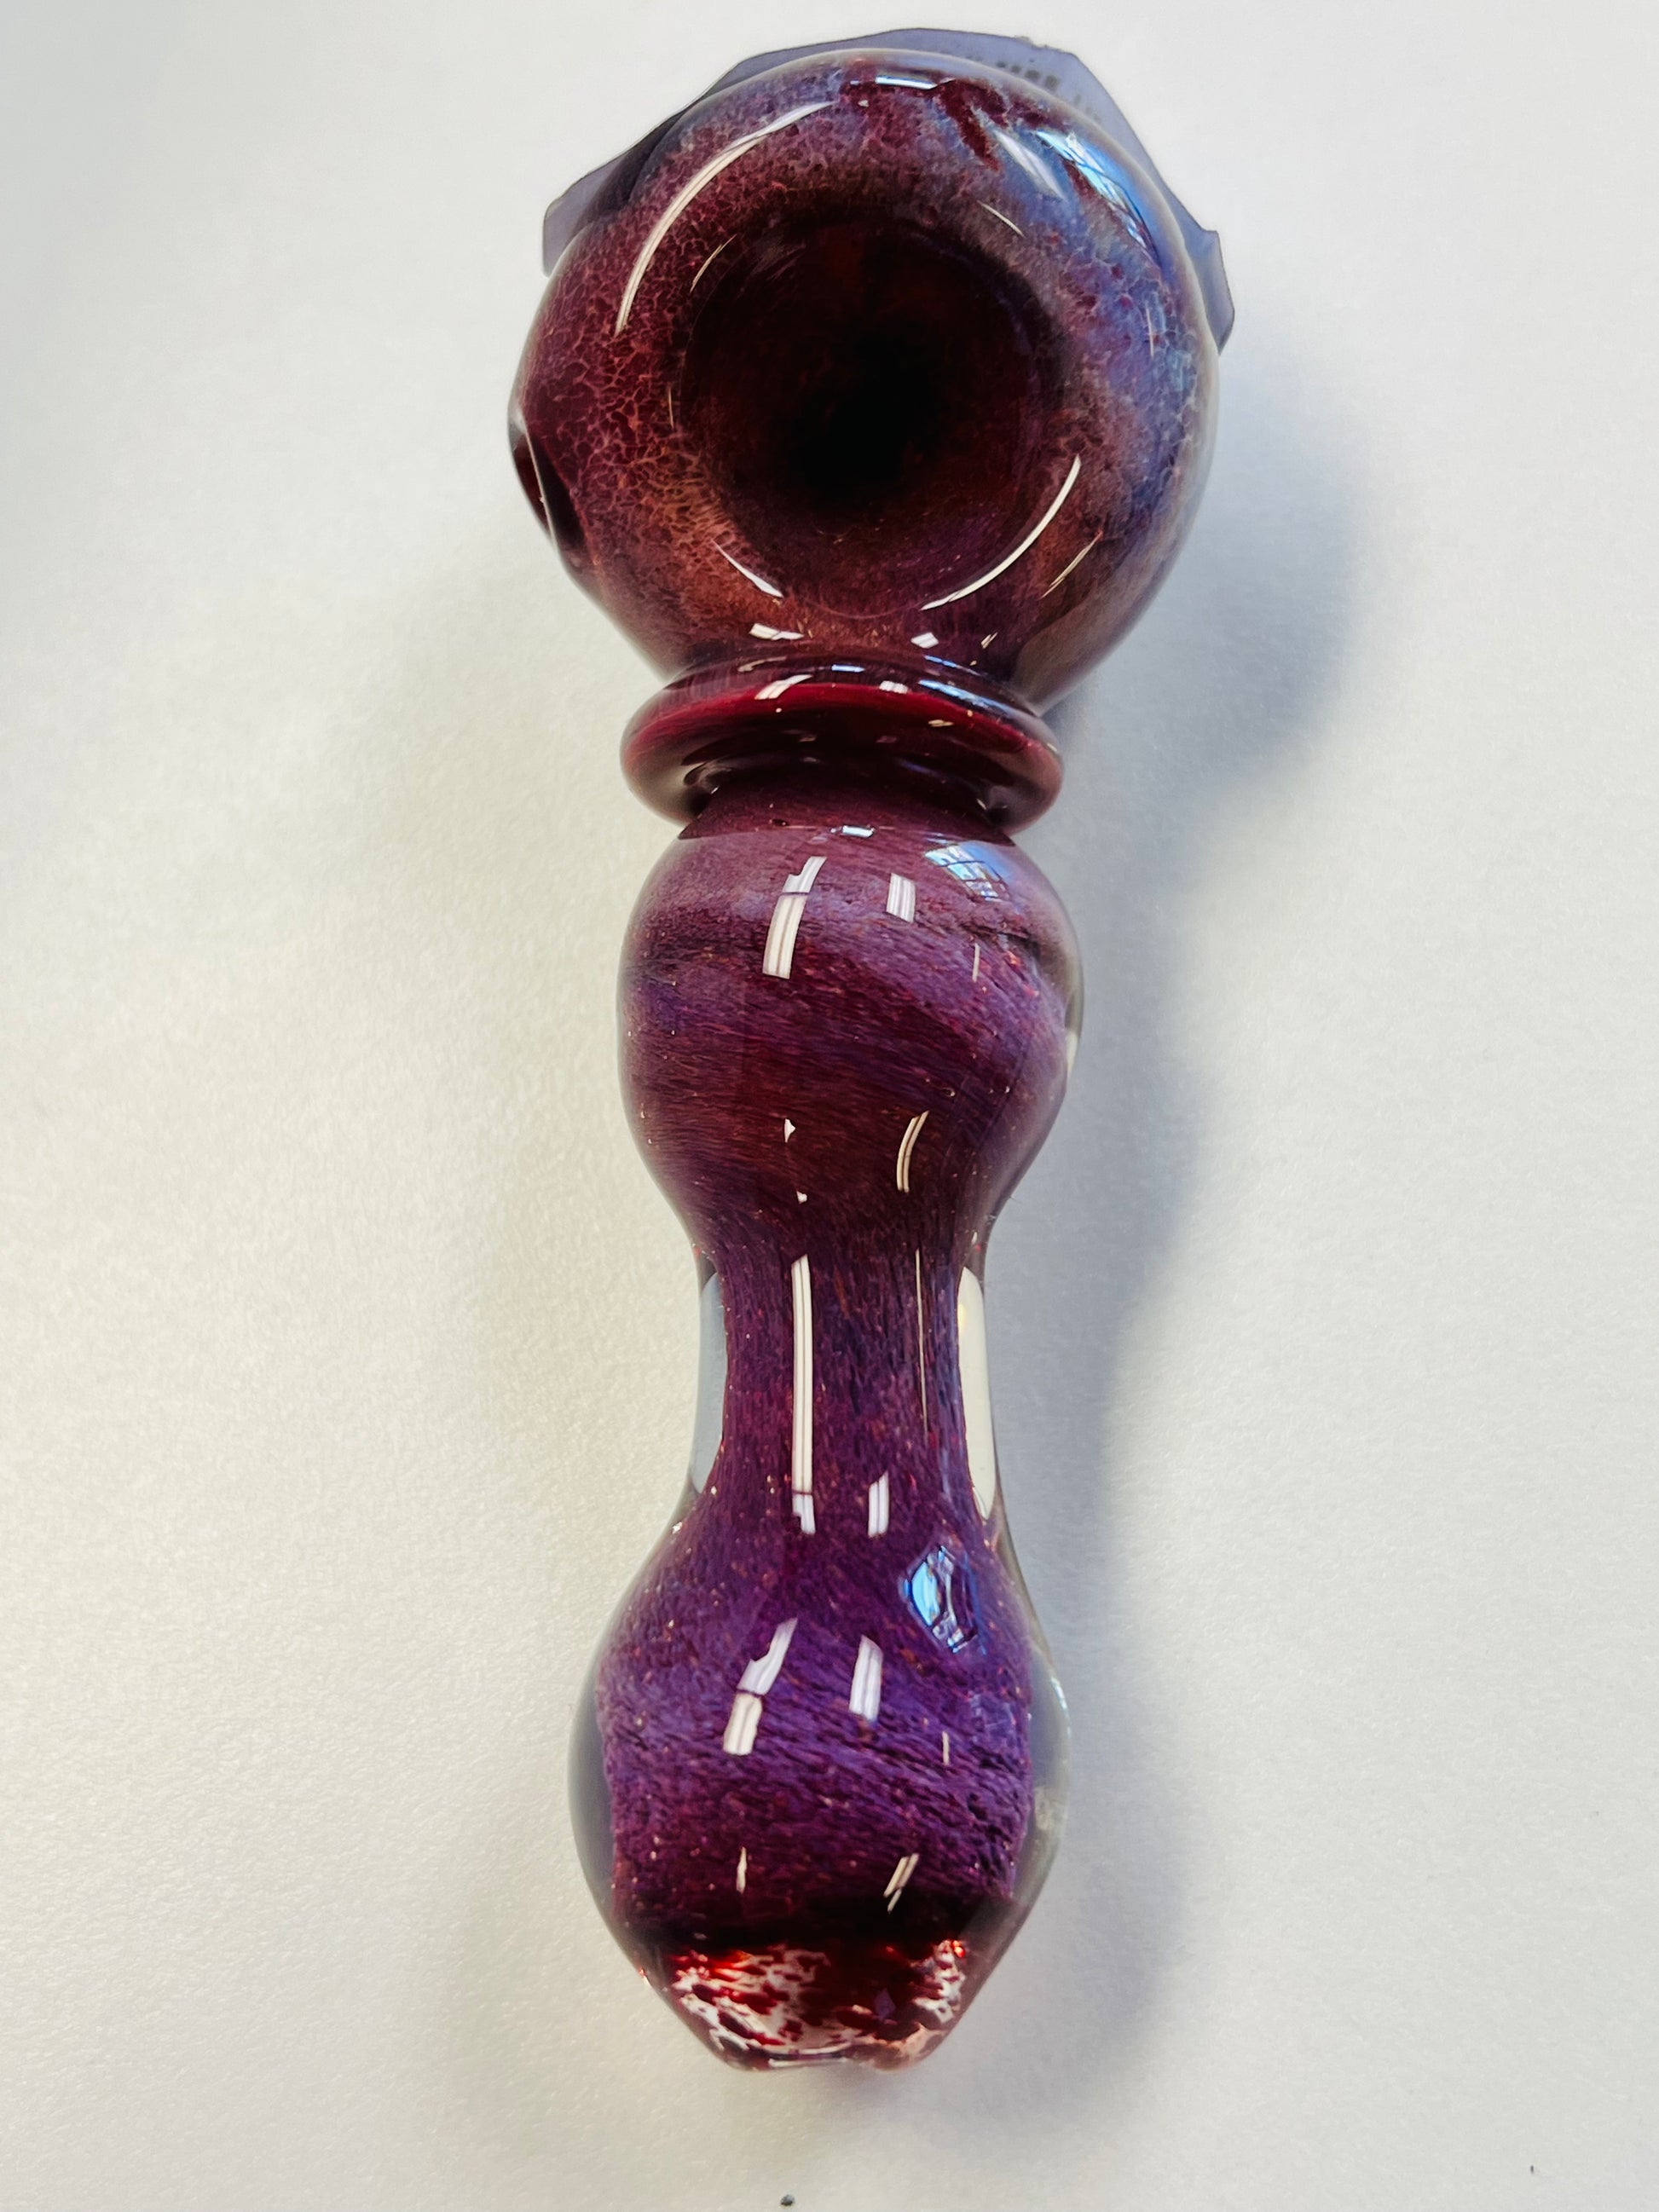 3.5 Inch Red Multicolor Hand Pipe W/ Carb yoga smokes yoga studio, delivery, delivery near me, yoga smokes smoke shop, find smoke shop, head shop near me, yoga studio, headshop, head shop, local smoke shop, psl, psl smoke shop, smoke shop, smokeshop, yoga, yoga studio, dispensary, local dispensary, smokeshop near me, port saint lucie, florida, port st lucie, lounge, life, highlife, love, stoned, highsociety. Yoga Smokes